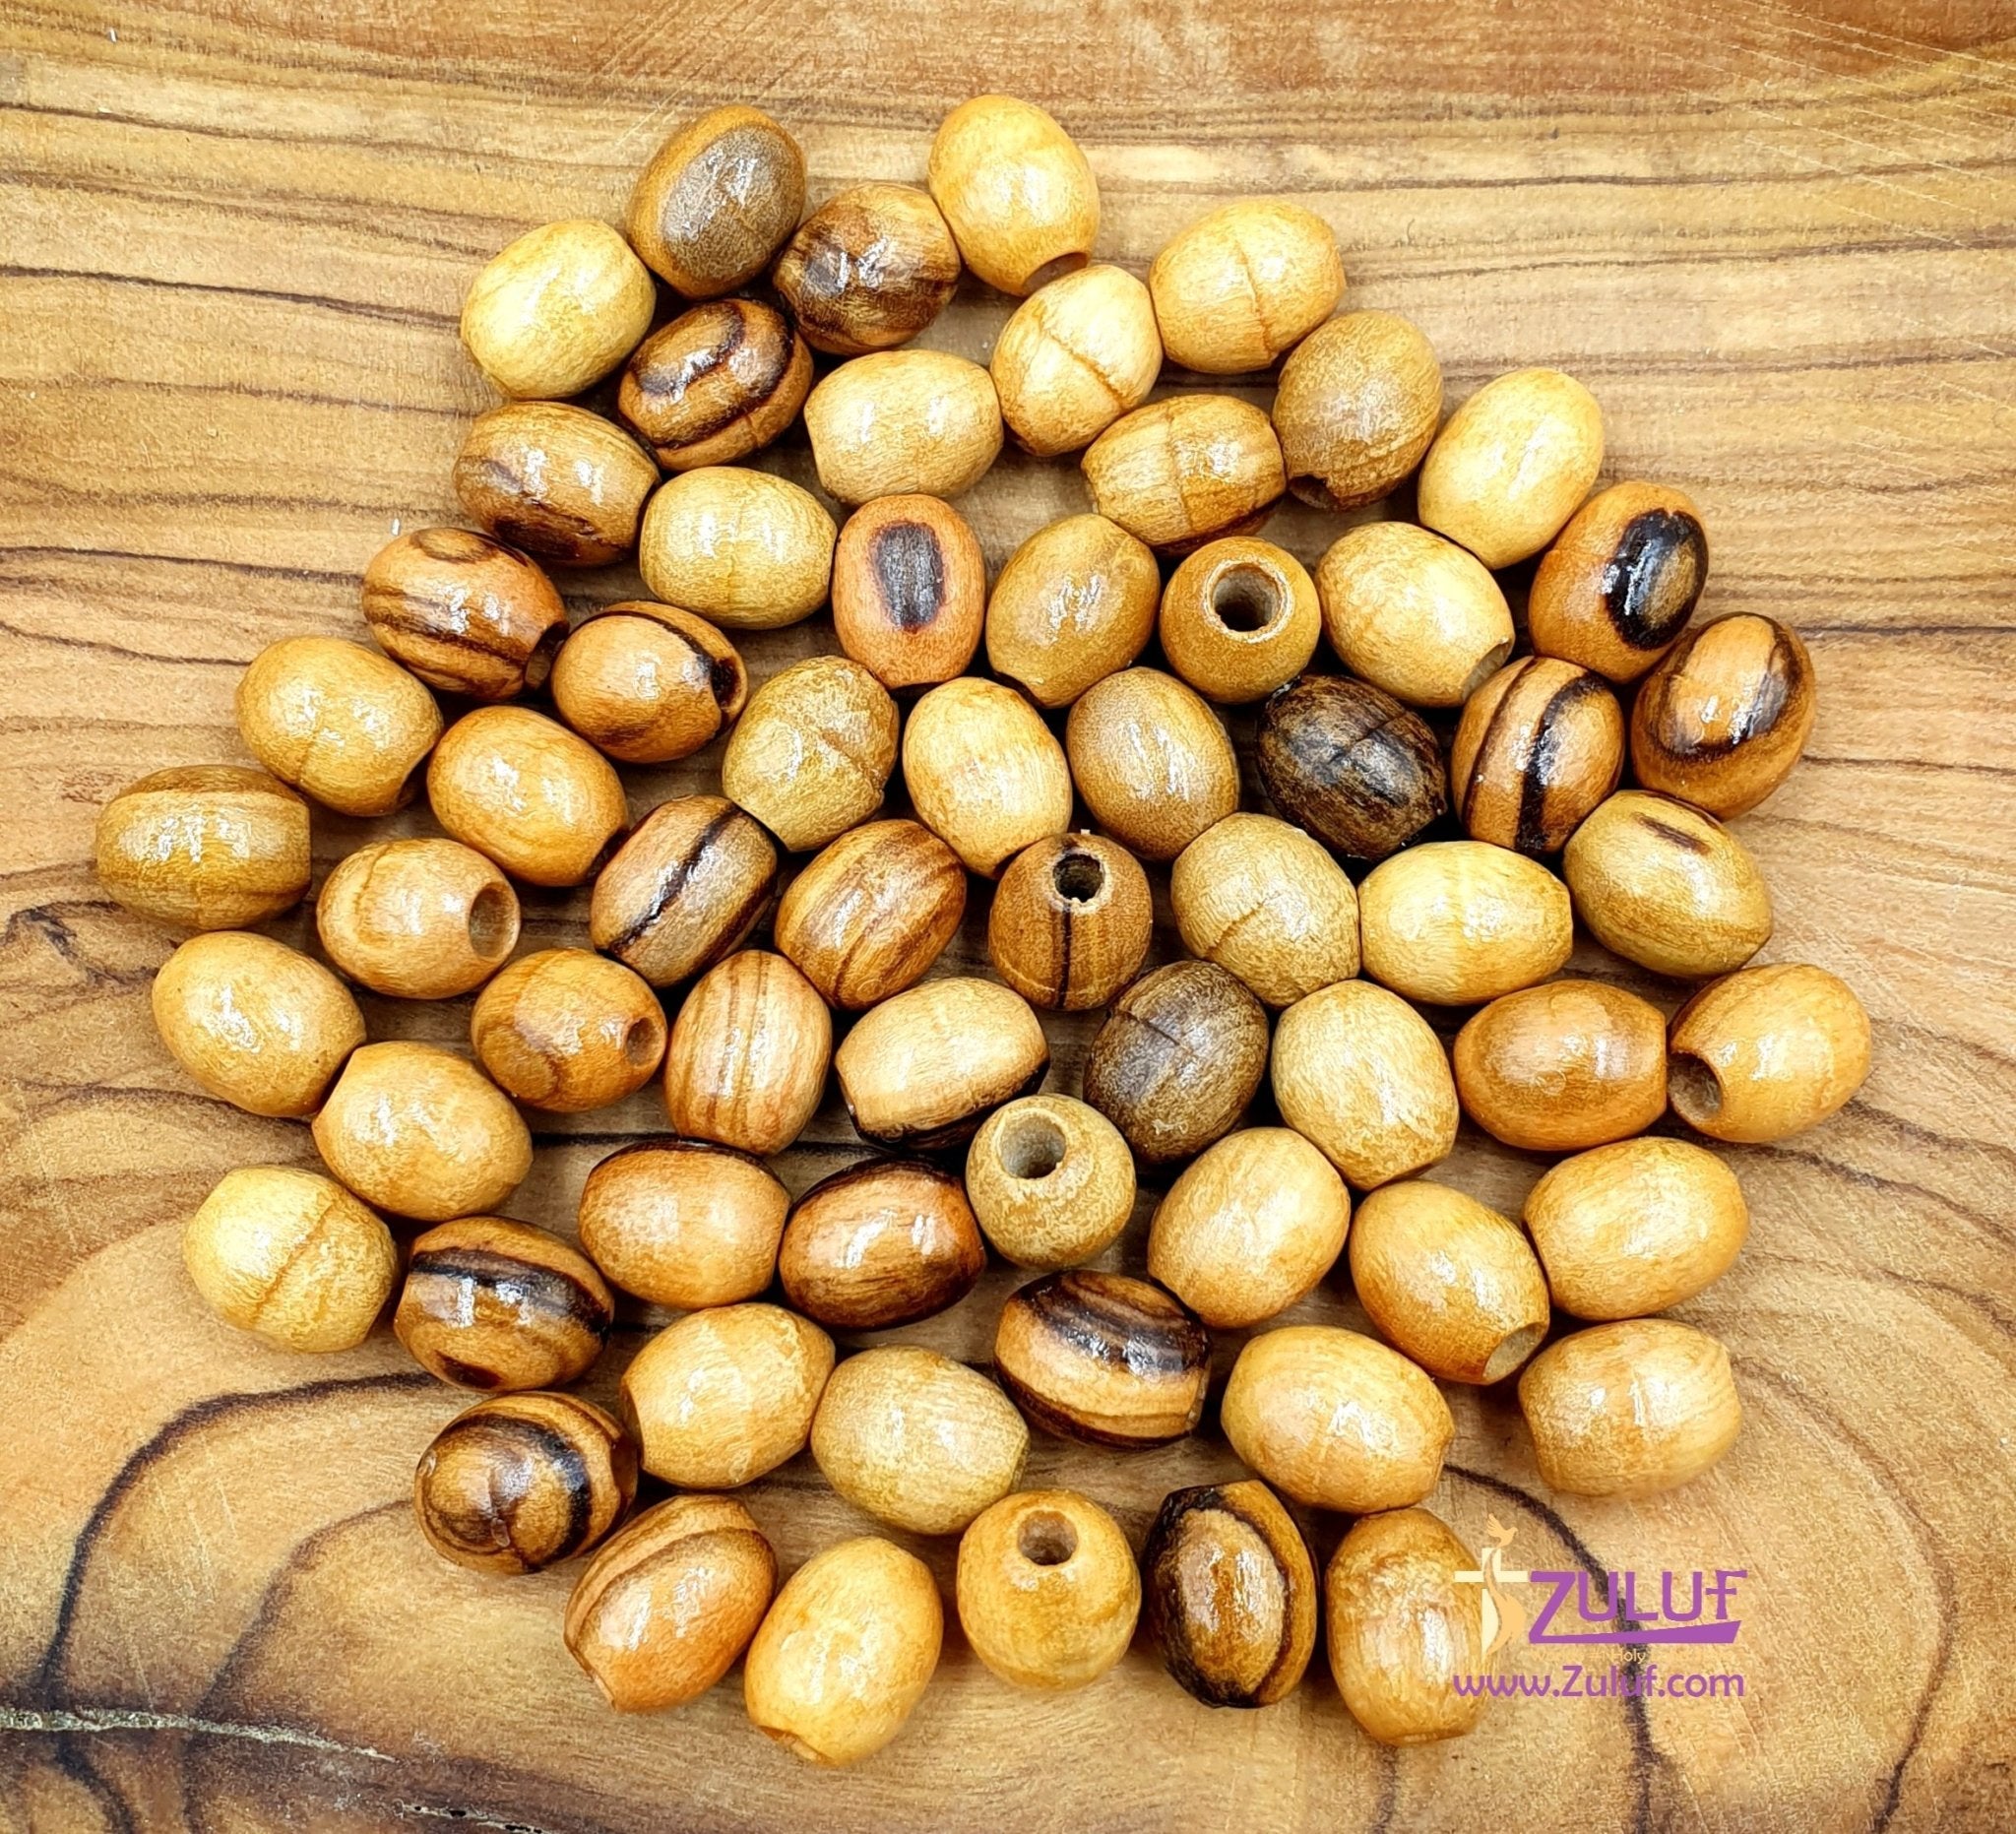 Nazareth Olive Wood Beads 10mm oval beads hand carved for rosary beads ( 60 Beads ) - BEAD010 - Zuluf